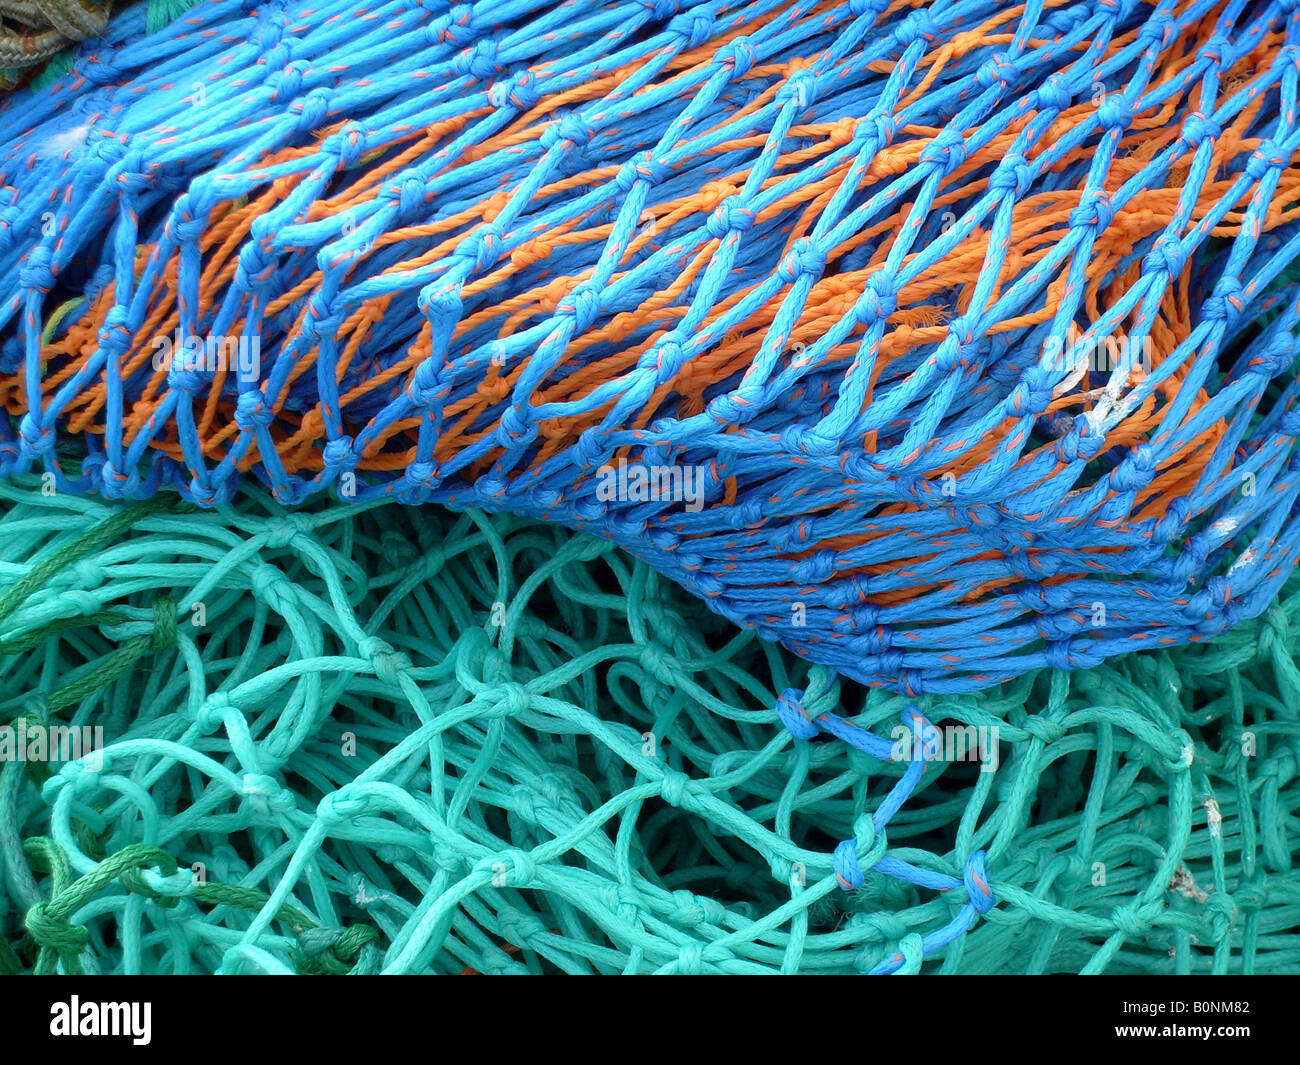 Colorful trawler fishing nets, Scarborough, North Yorkshire, England. Stock Photo